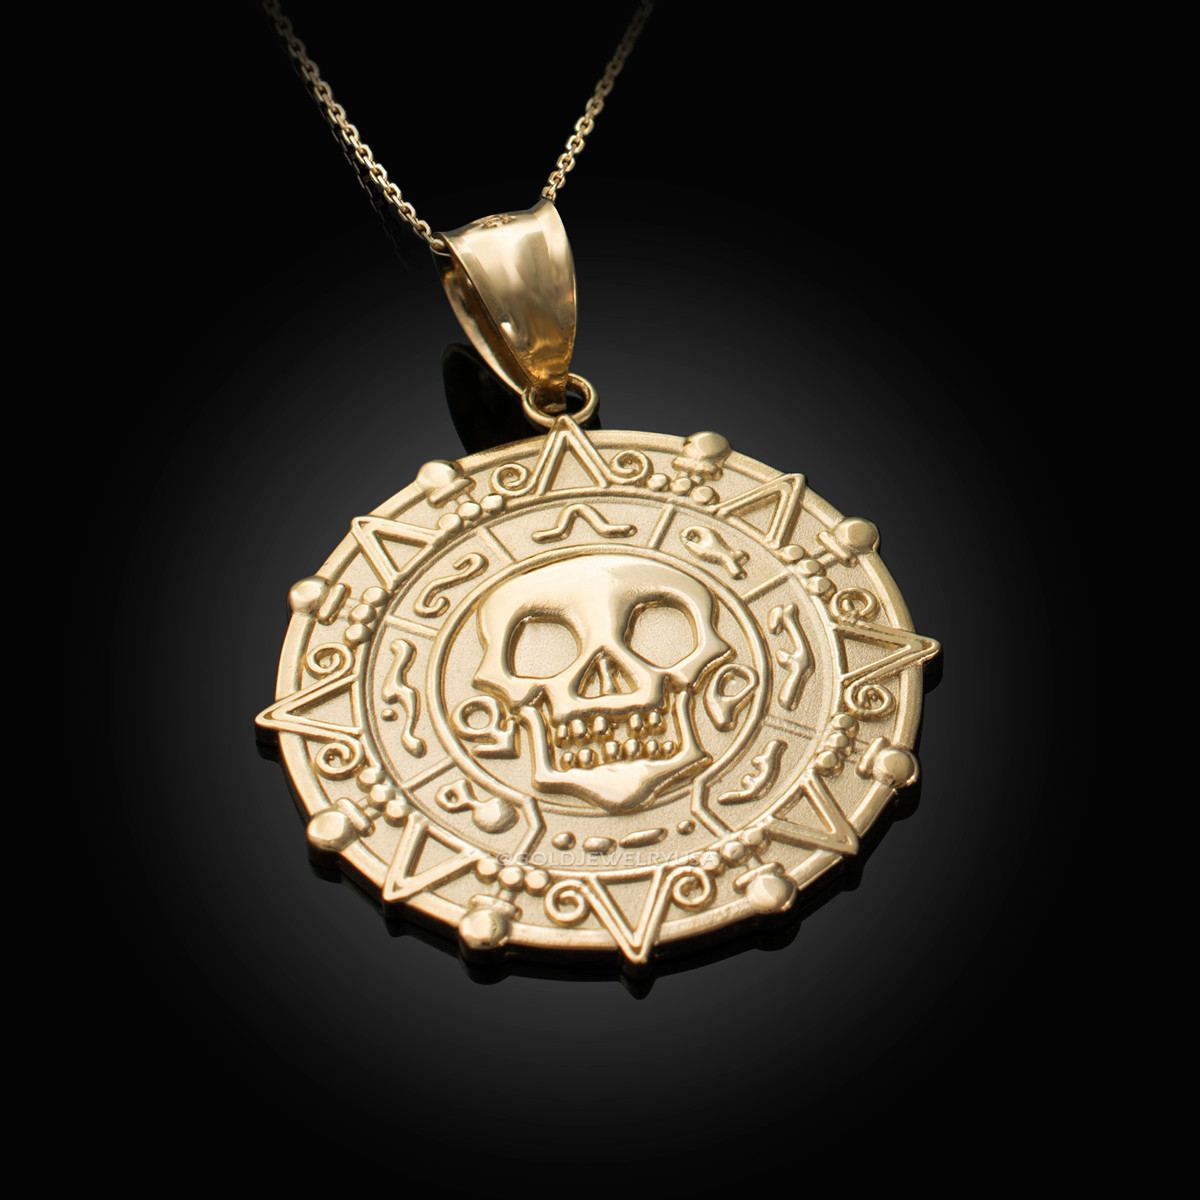 Amazon.com: Inspired By Pirates of the Caribbean Movies Cursed Aztec Coin Medallion  Necklace Skull Necklace New Version (antique brass color)